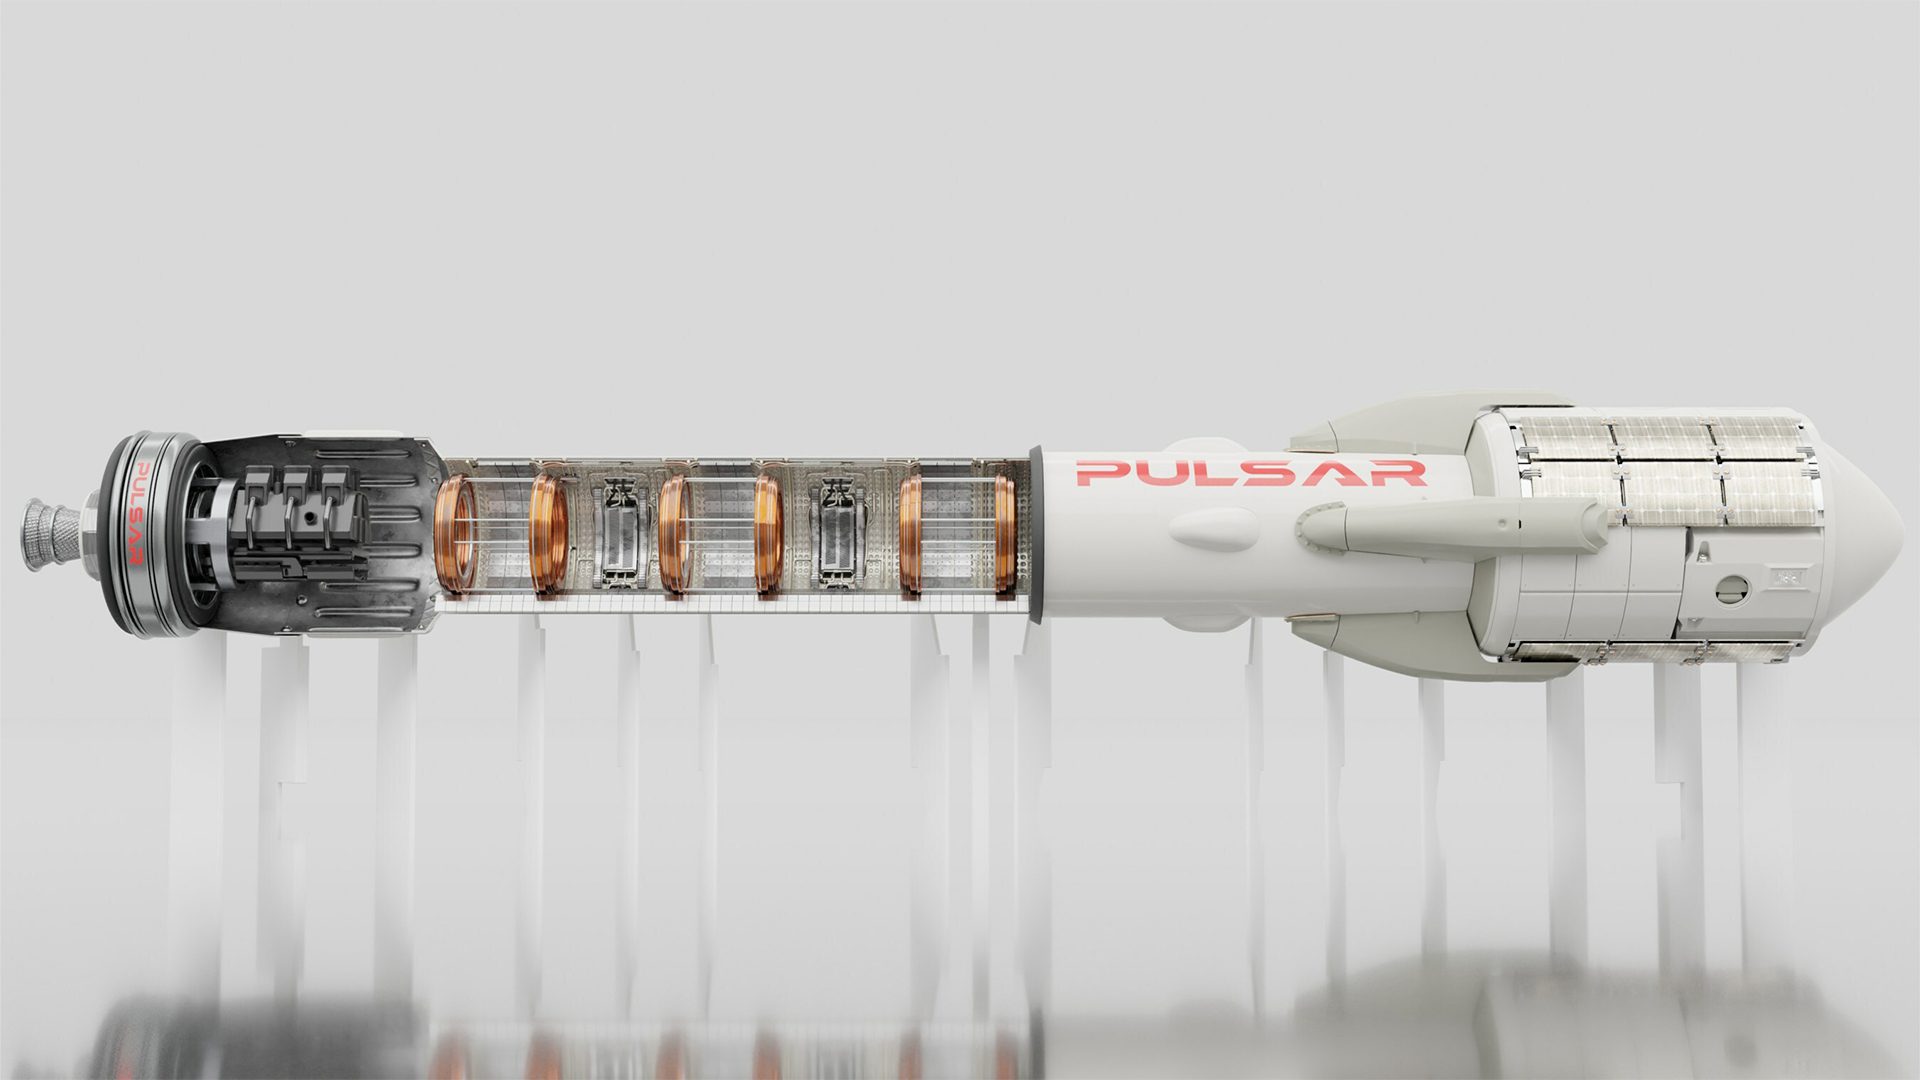 Pulsar Fusion's concept of a nuclear fusion rocket engine